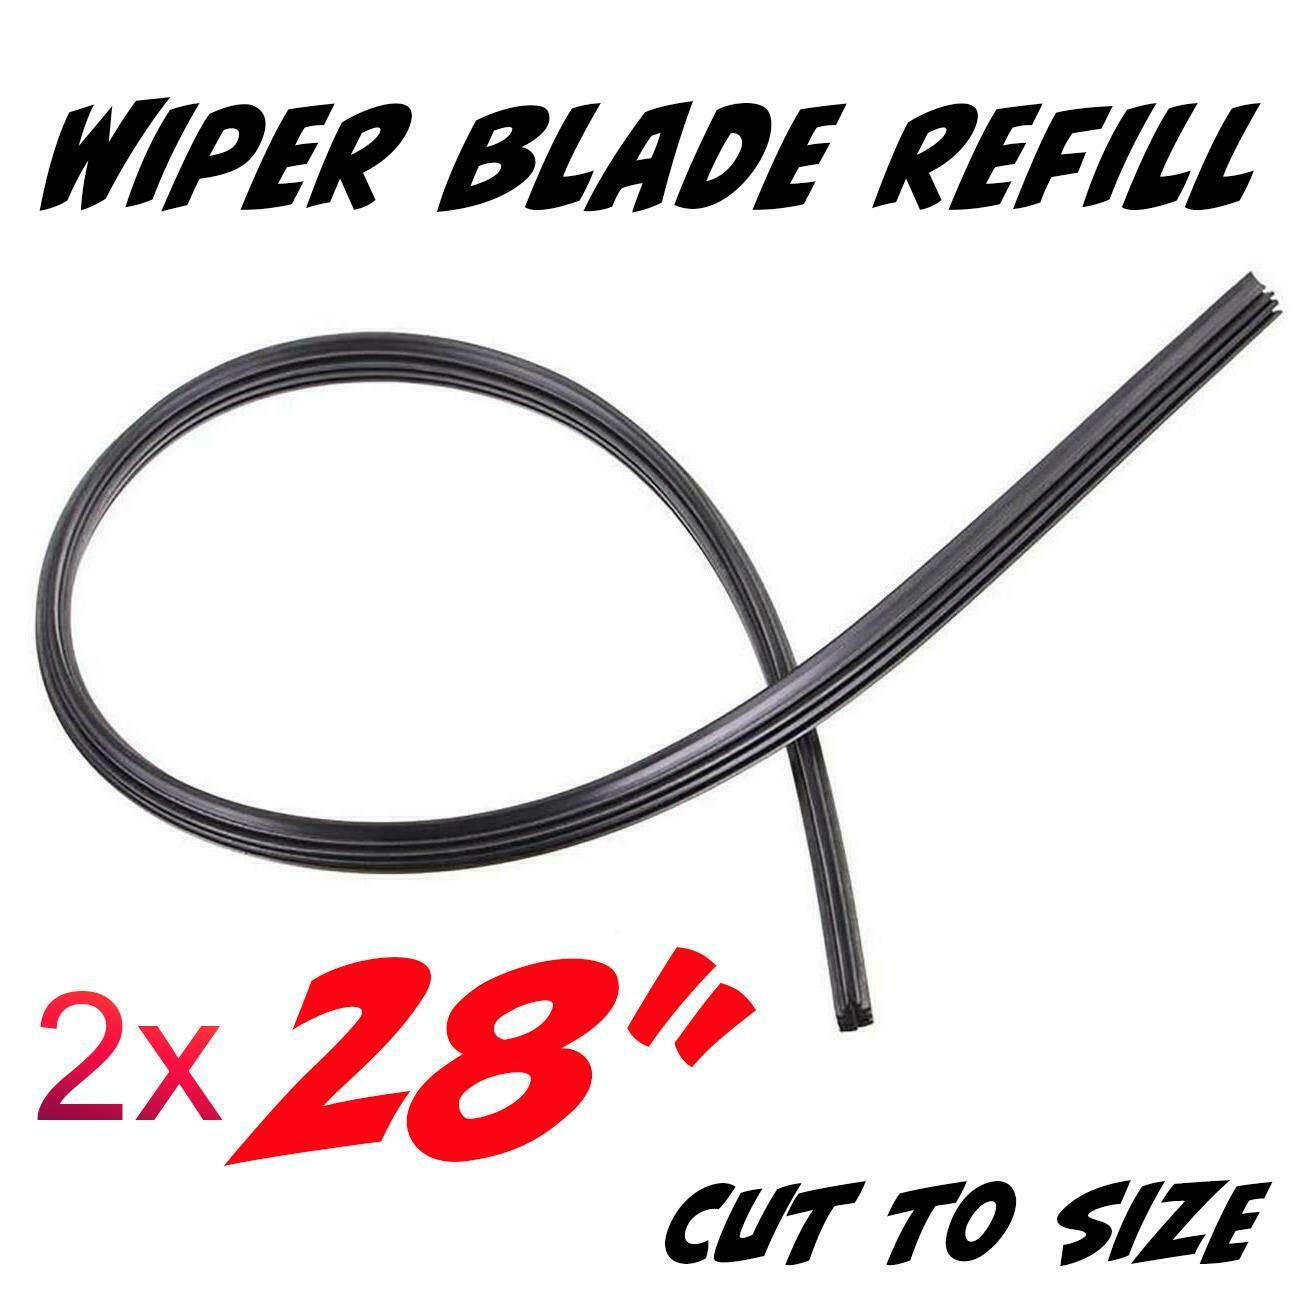 2 x universal front wiper blade rubber Insert Refill 28" replacement cut to size